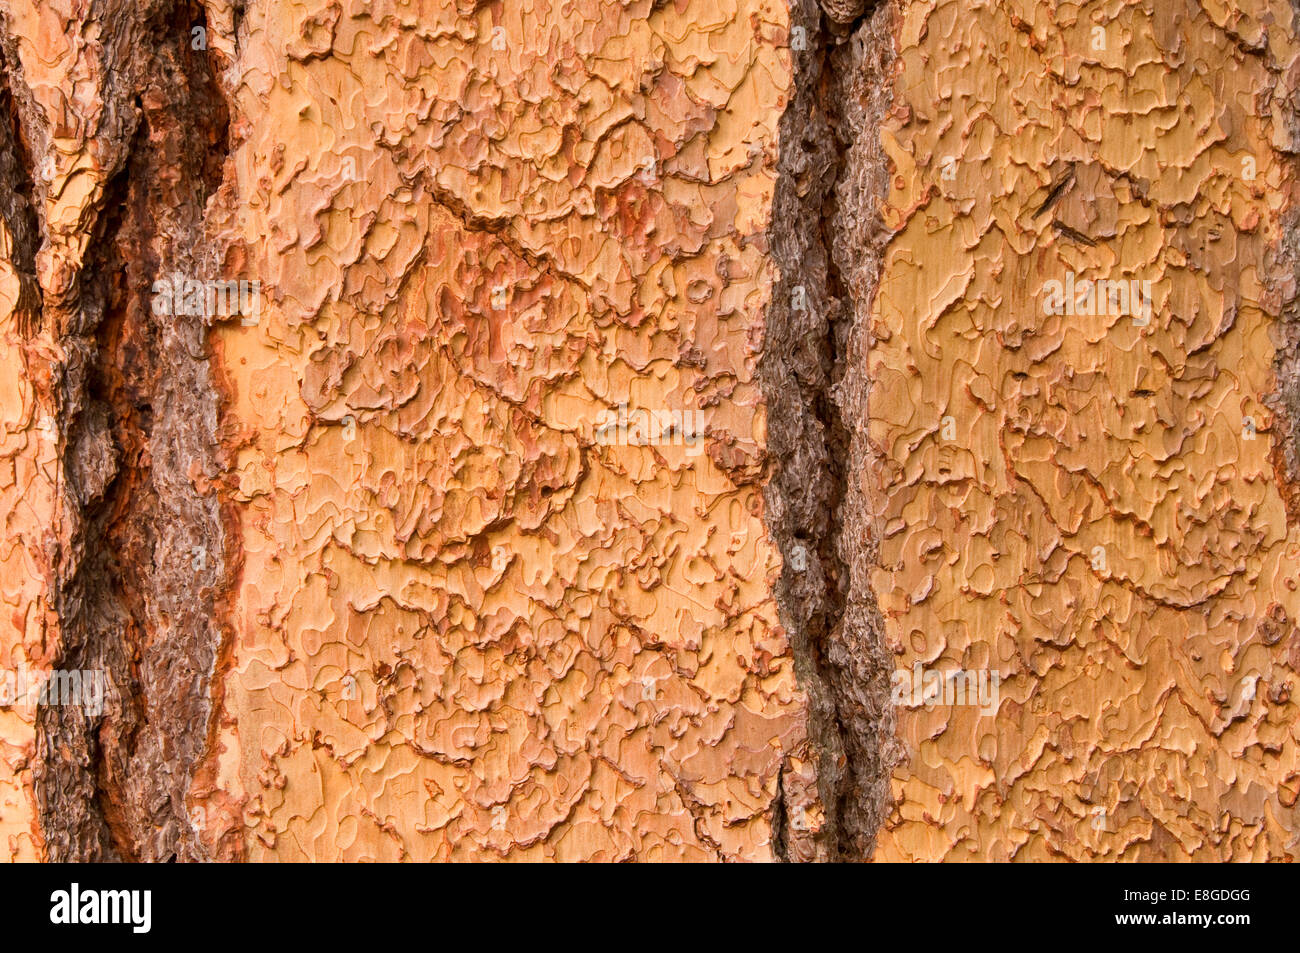 Painted Puzzle Pieces: How Ponderosa Pine Bark Protects and Preserves